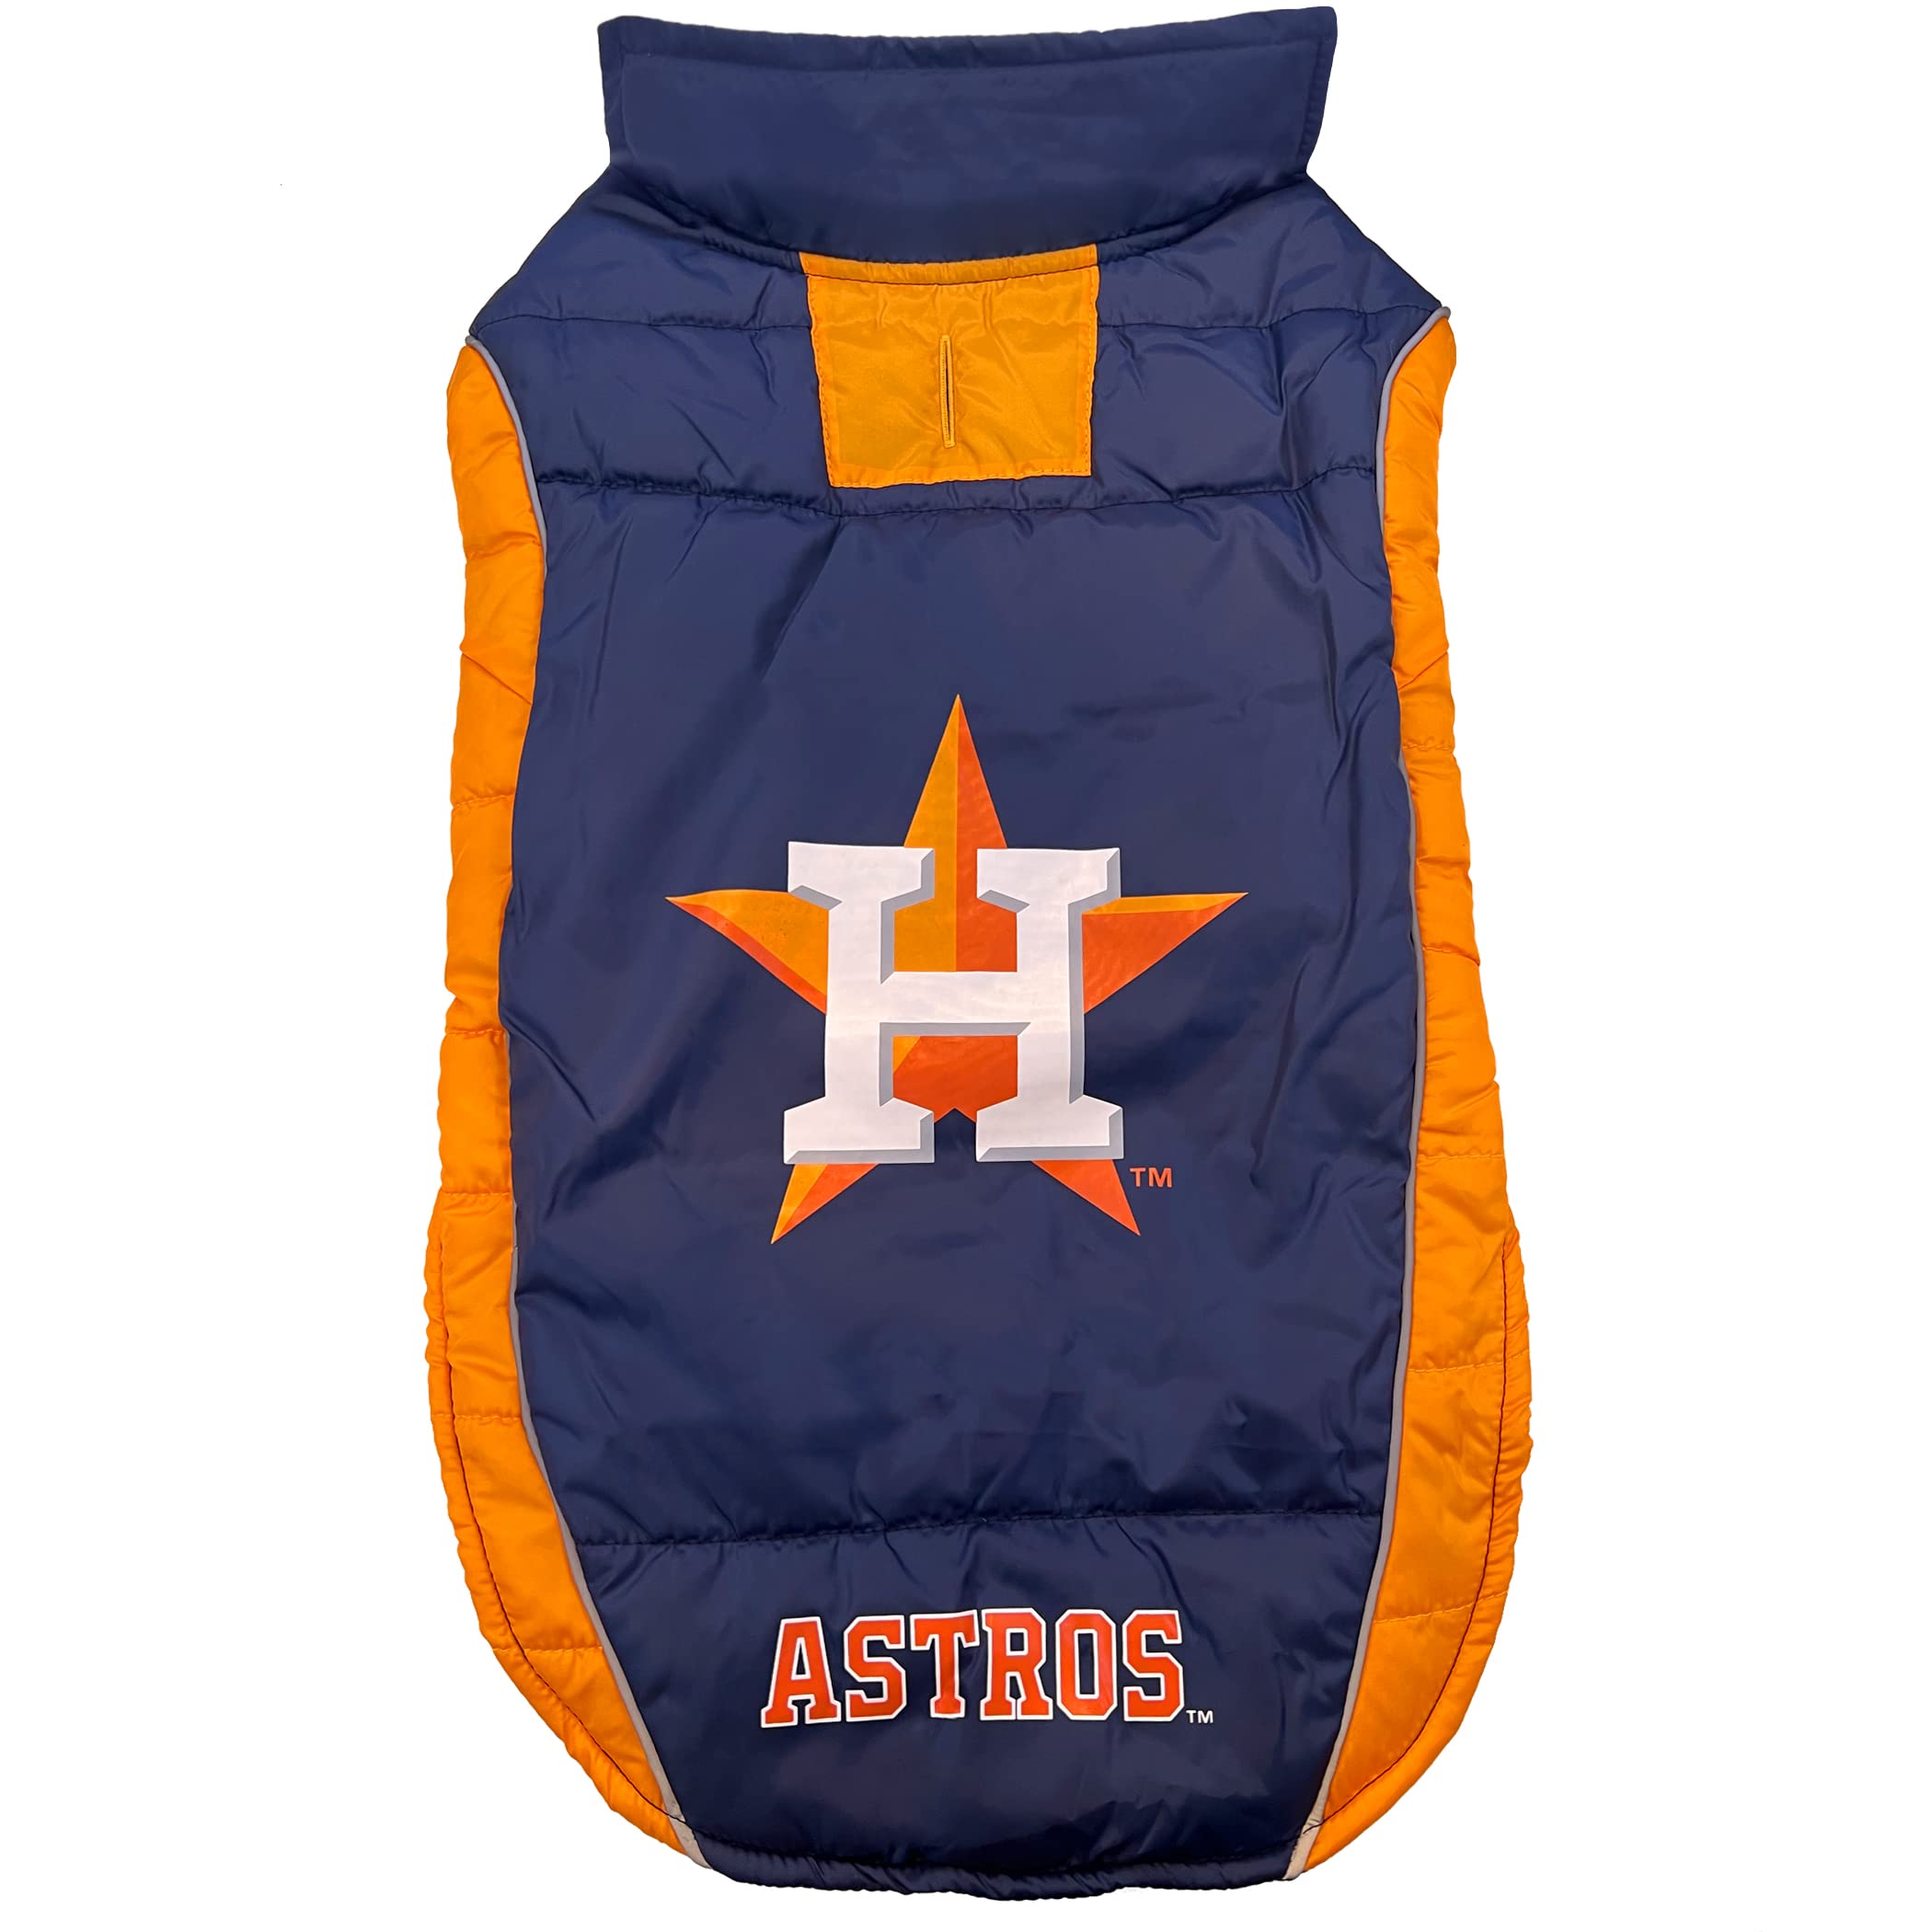 Pets First MLB Houston Astros Puffer Vest for Dogs & cats Size Medium. Warm cozy and Waterproof Dog coat for Small and Large Dogscats. Best